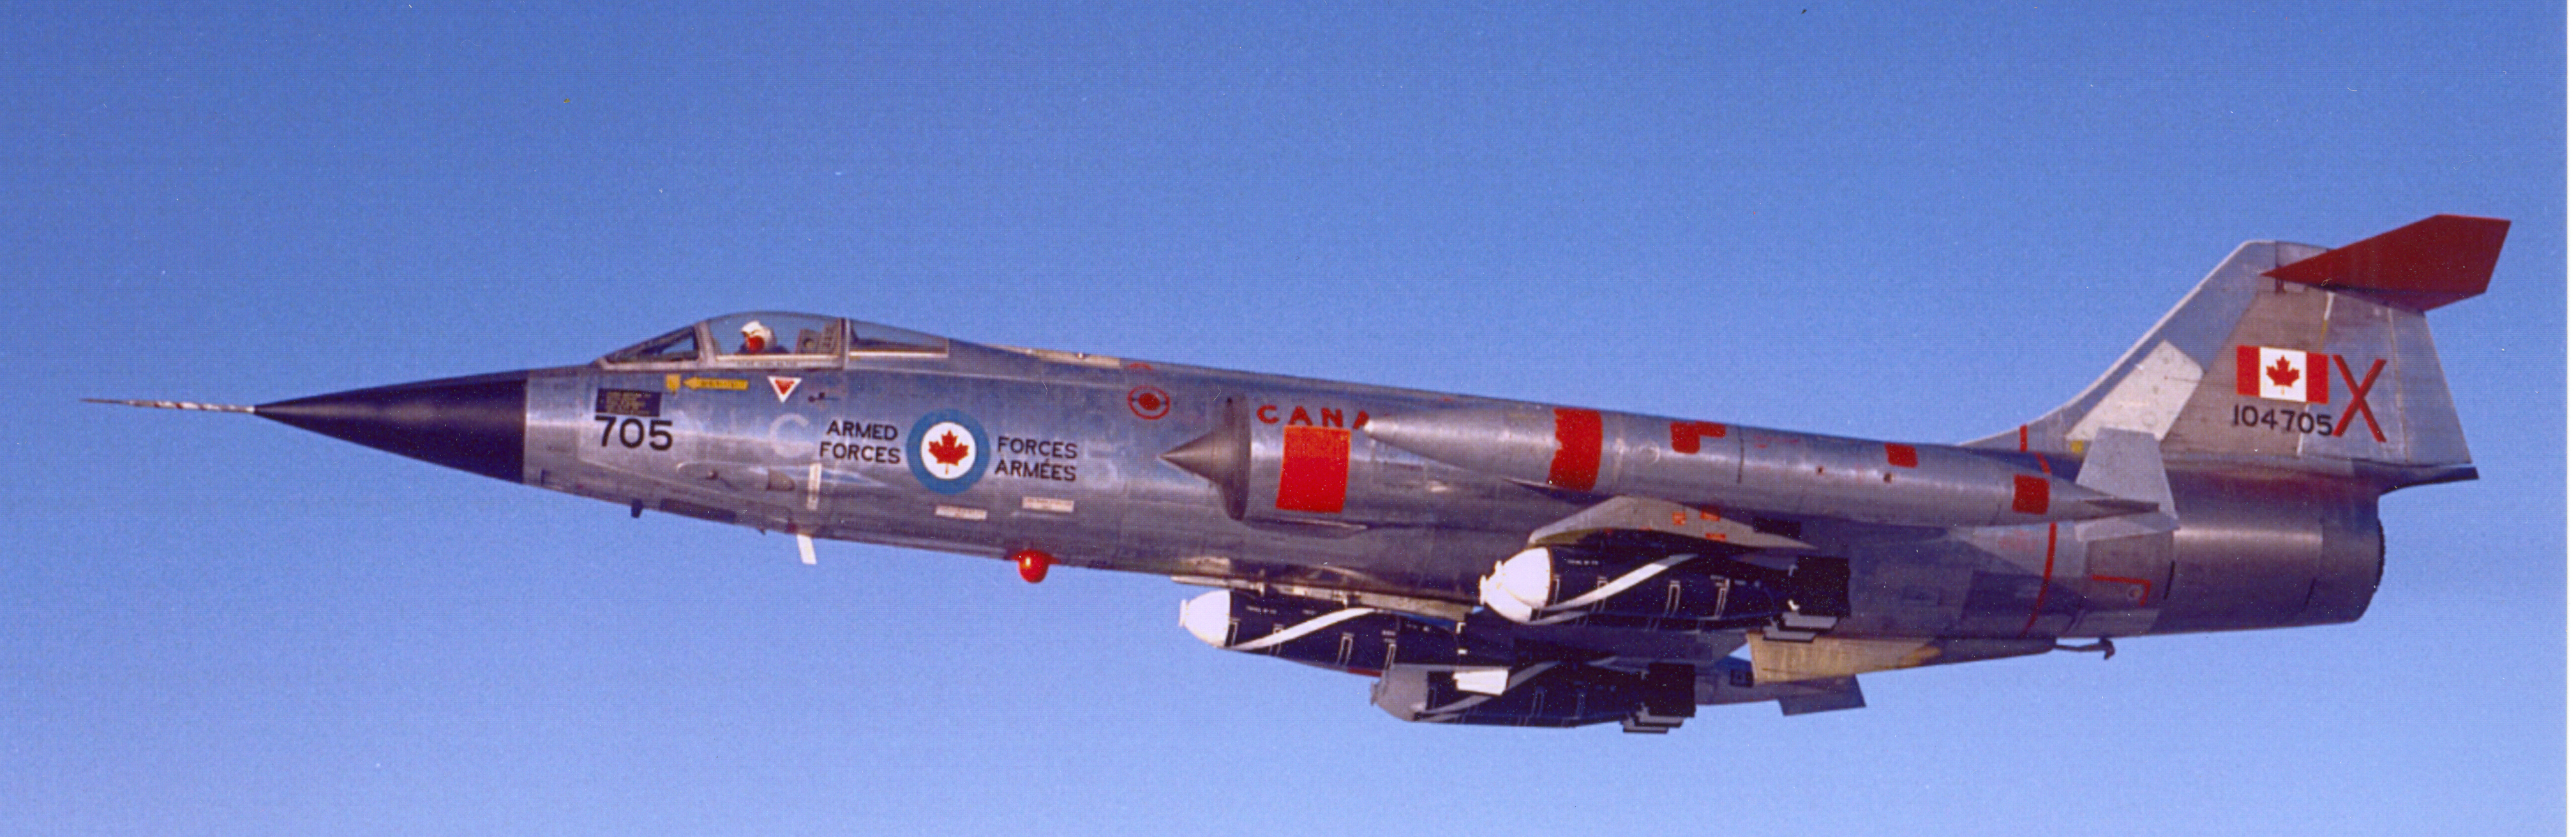 A dramatic view of a CF-104 Starfighter from the Aerospace Engineering Test Establishment carrying a full load of BL-755 cluster bombs. PHOTO: DND